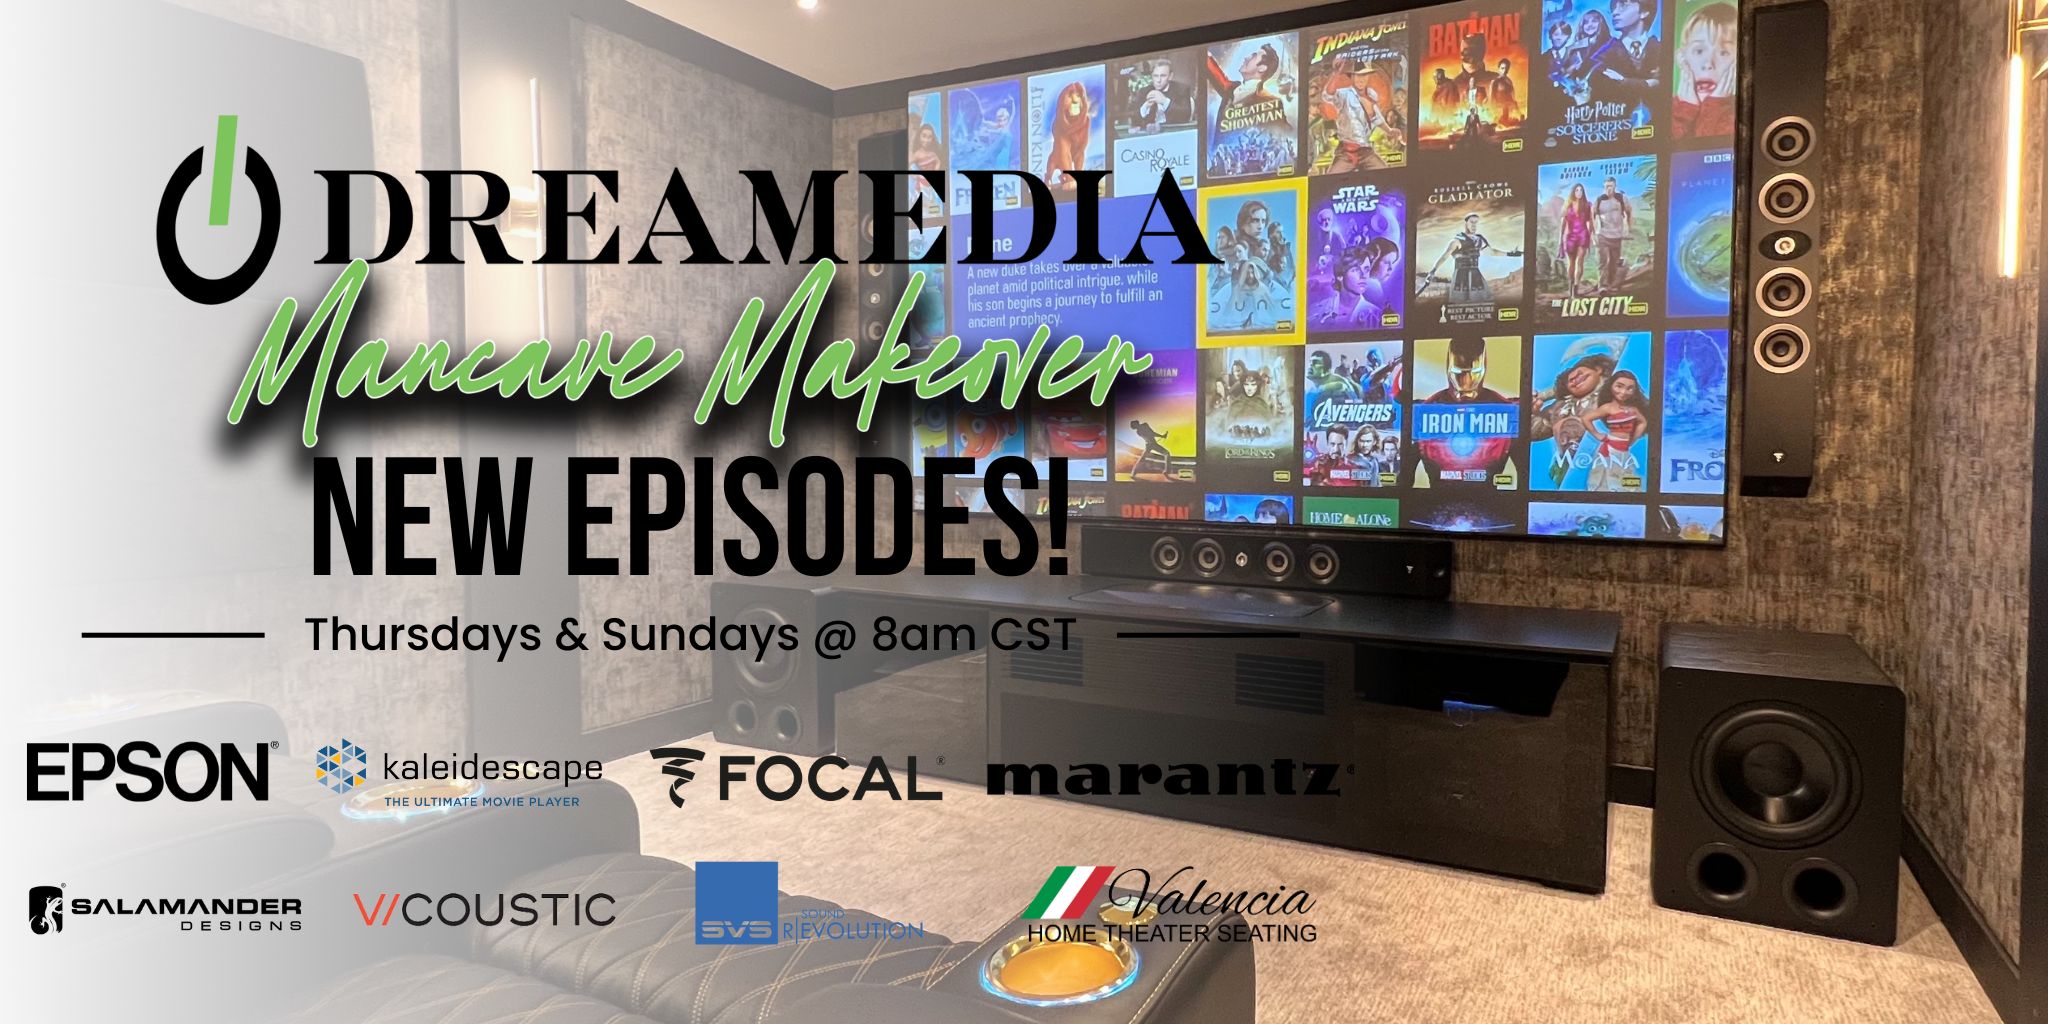 Dreamedia Home Theater Announces Premiere of Dreamedia Man Cave Makeover Series, the Biggest Home Theater Giveaway on YouTube